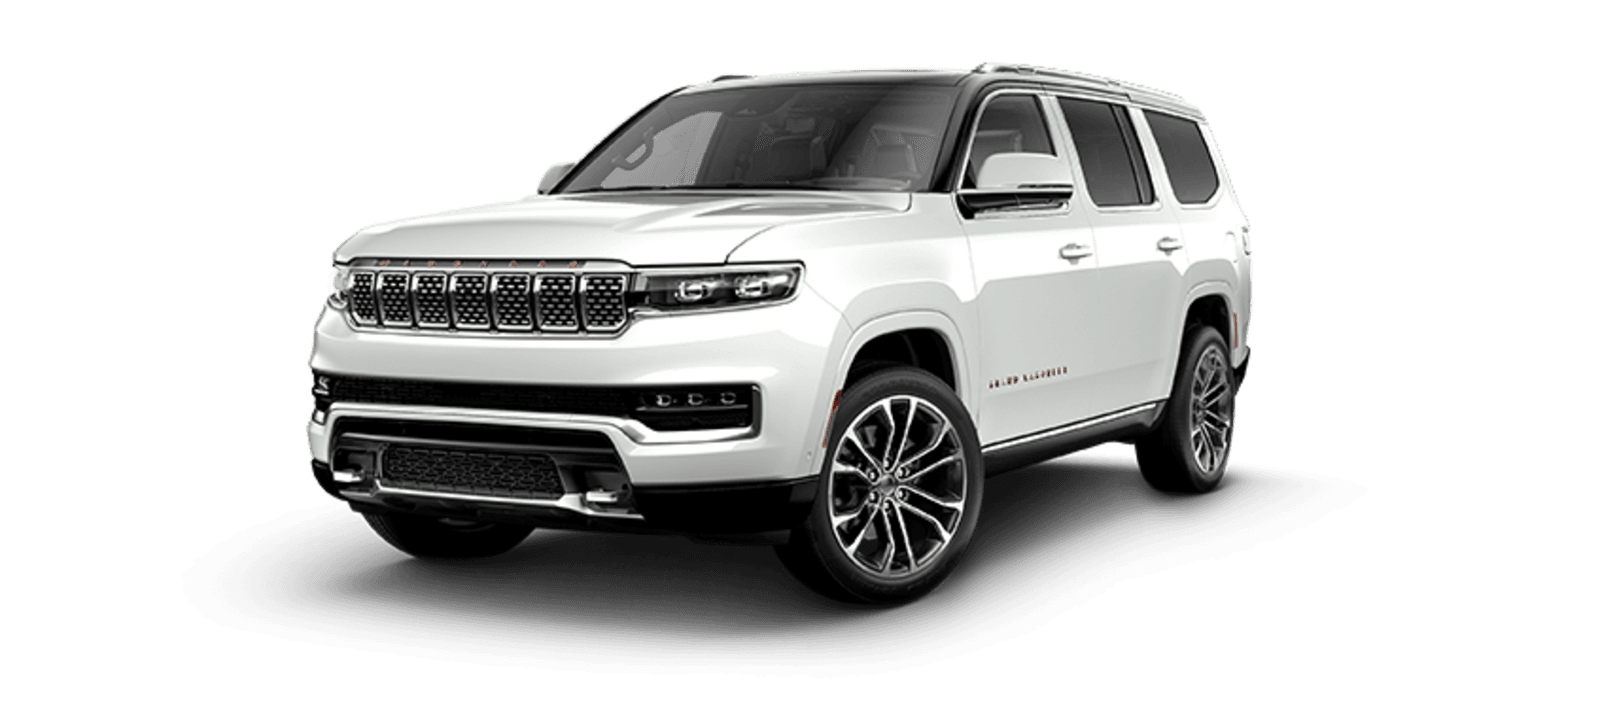 2021 Jeep Wagoneer Full View in Bright White with Wheels